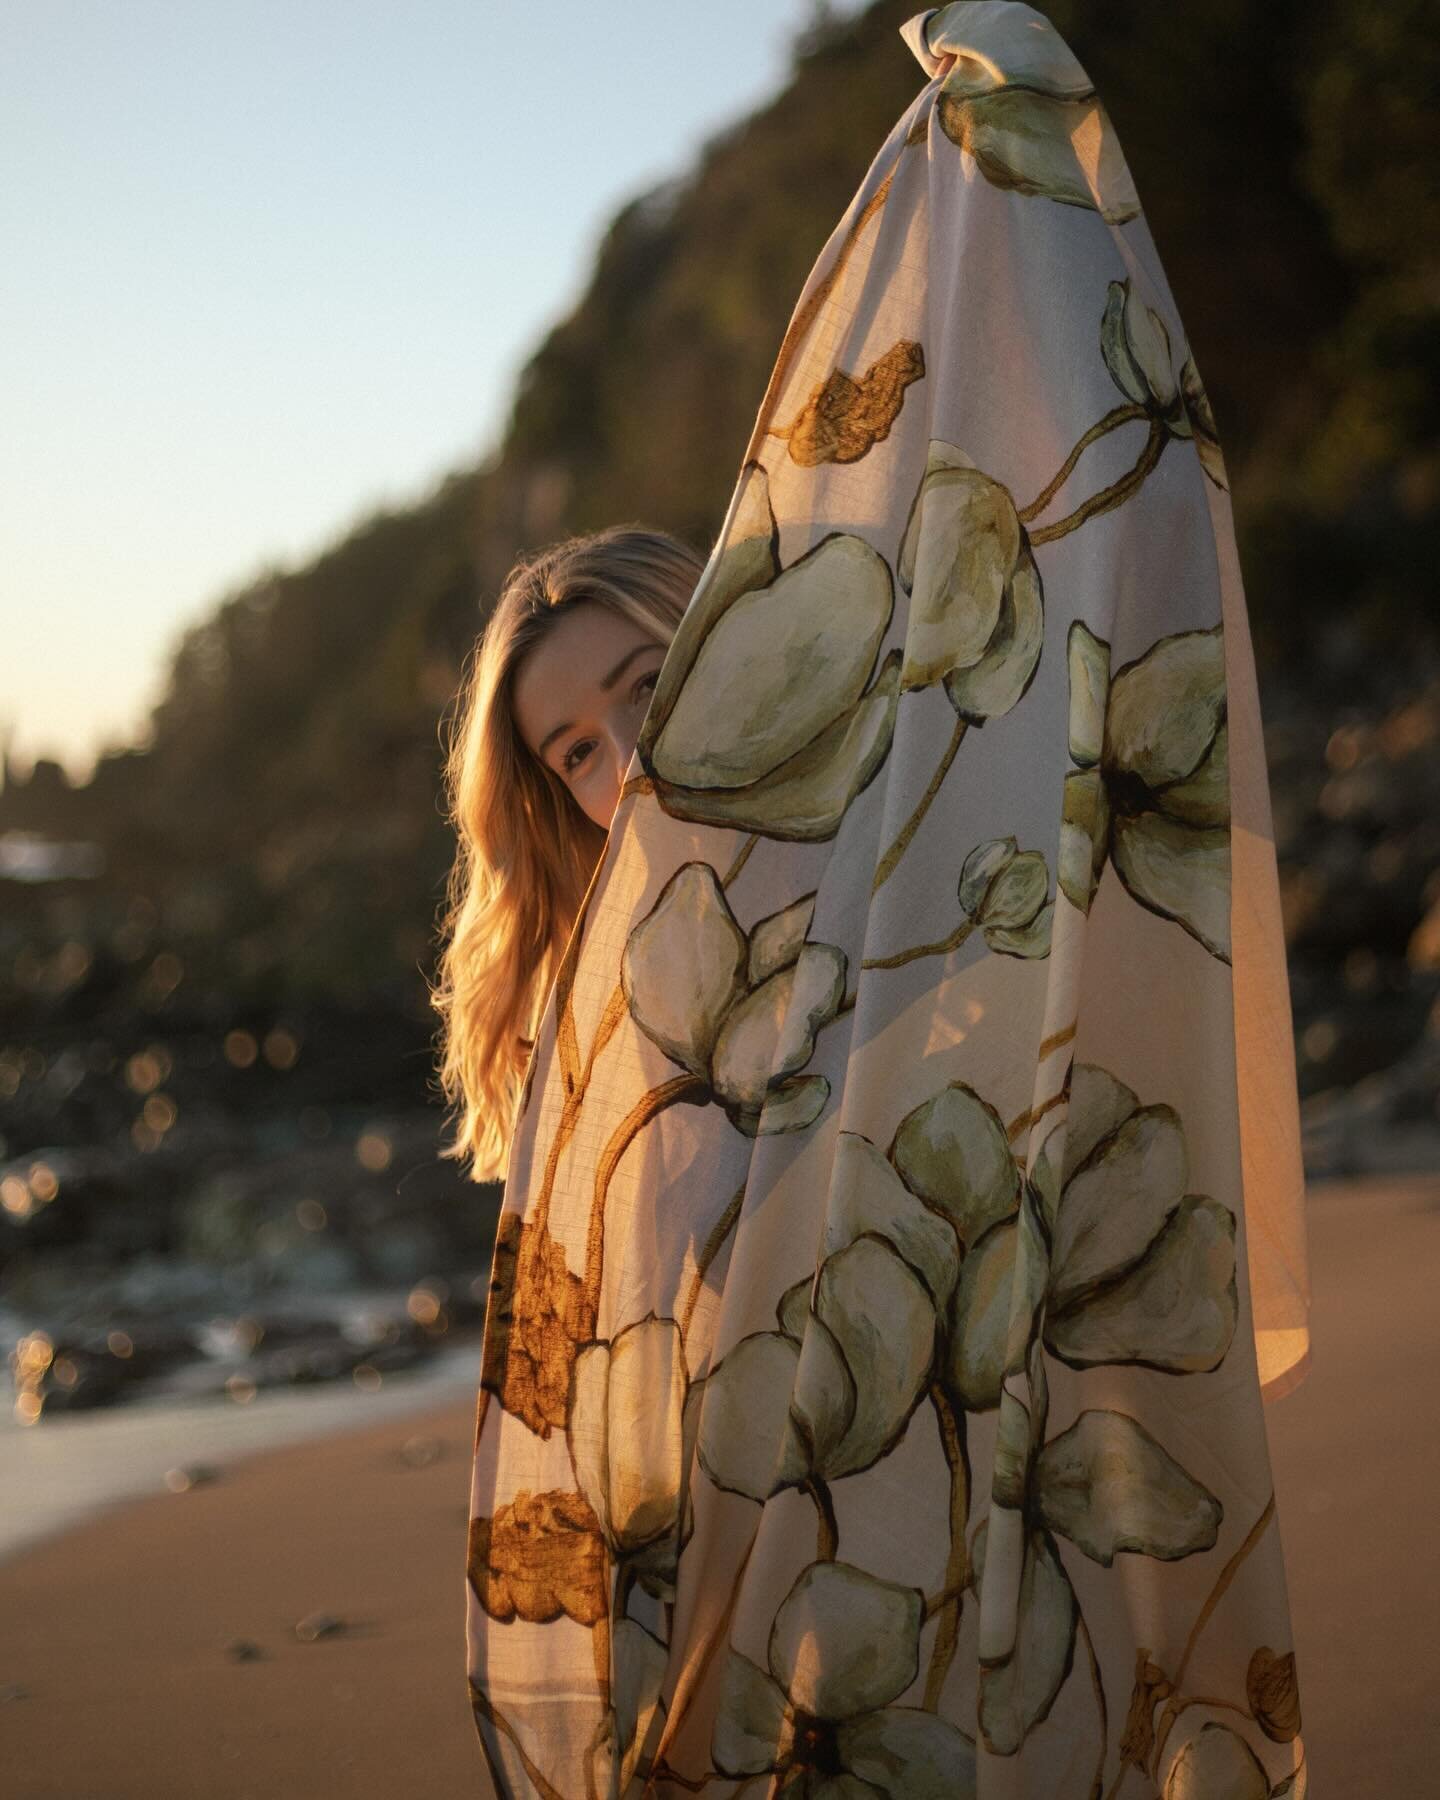 A few more shots from the @onehournorth.nz campaign that we featured on this month&rsquo;s cover. 

How beautiful is the print on this sarong? This was designed by local artist @petrinajose_art - Make sure to pick up and read the article with Annelie